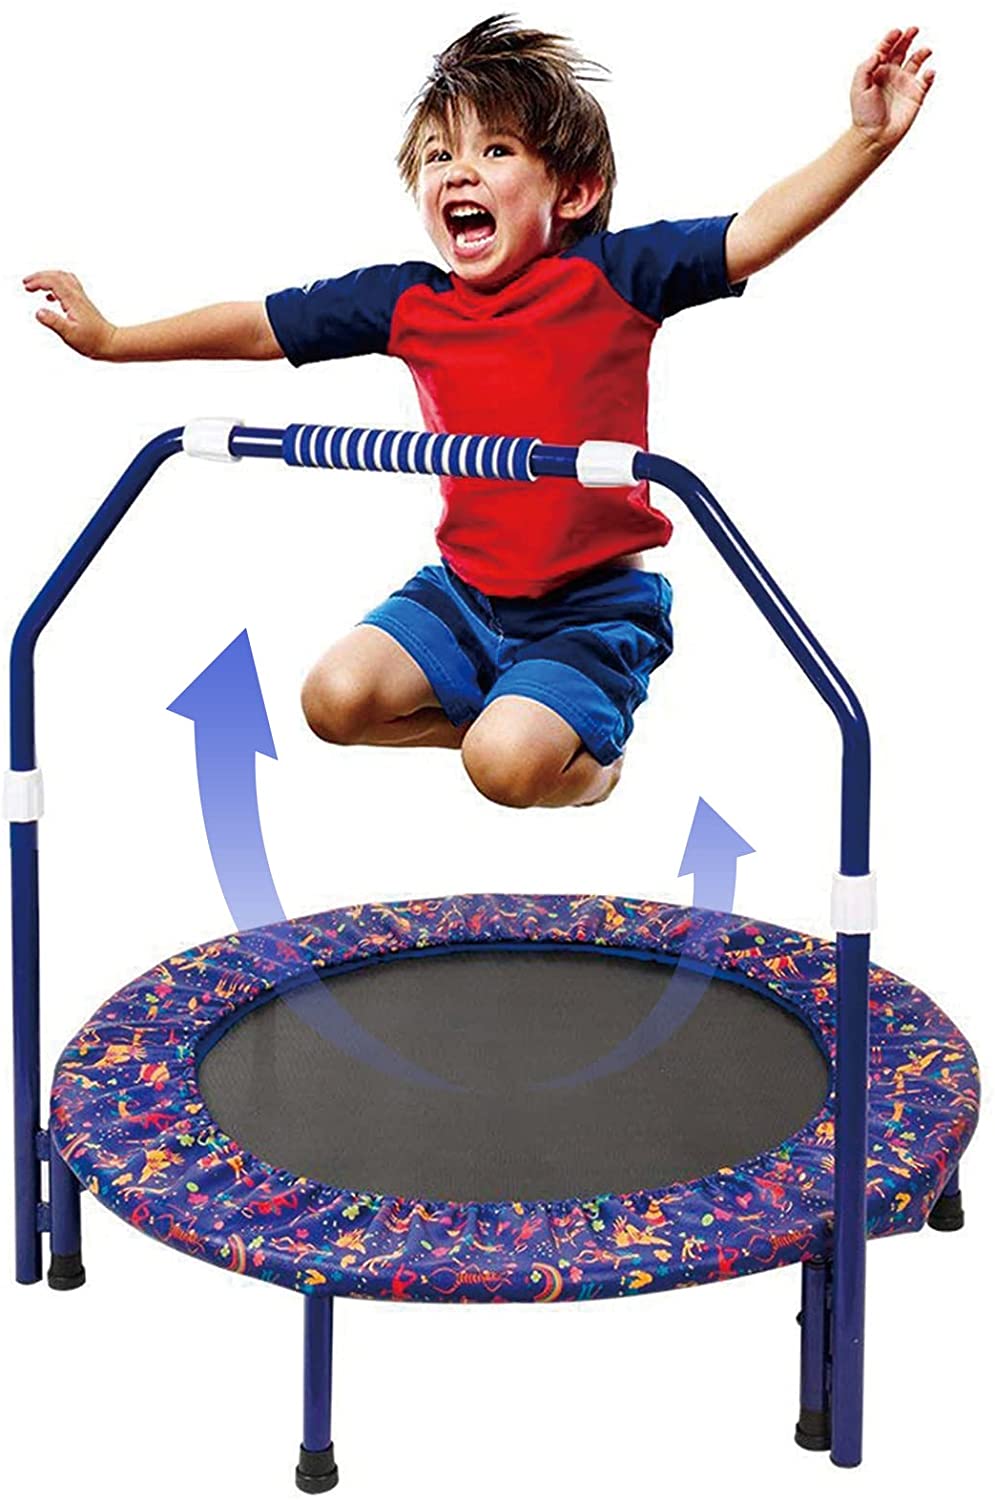 EALING BABY 36'' Kids Trampoline-Mini Trampoline With Foldable Bungee -Toddler TrampolineWith Rebounder Adjustable Handrail And Padded Cover -Black -Purple Outdoor-Indoor Trampoline For Exercise